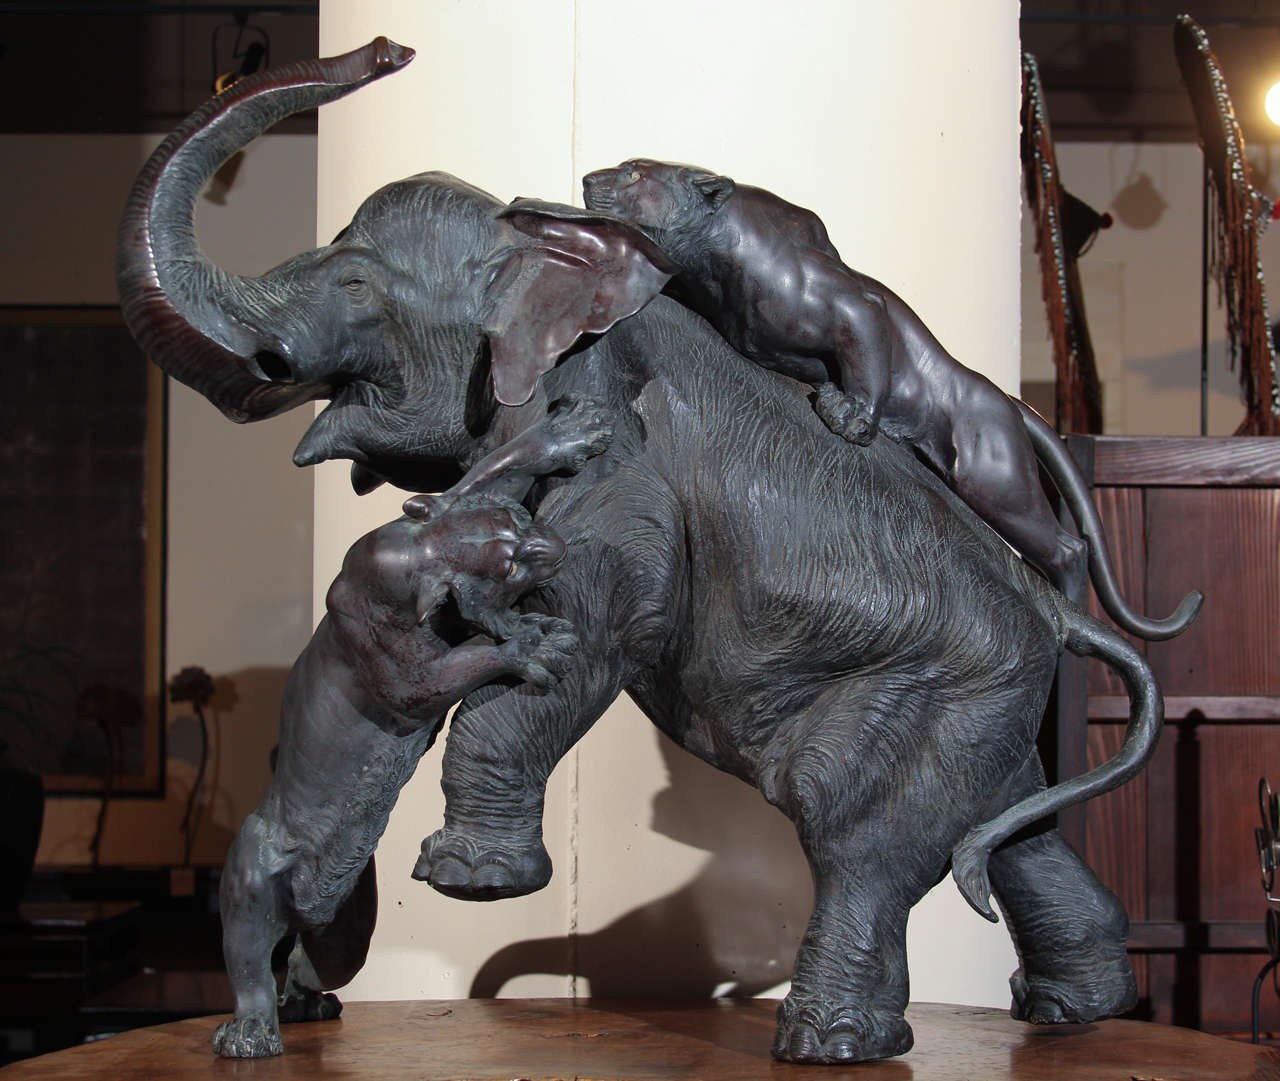 Finely detailed Japanese bronze sculpture of elephant with upturned trunk attacked by tigers. Natural lacquered wood Stand. 
Signed Genryusai Seiya, probably late 19th century.

Elephant: 40